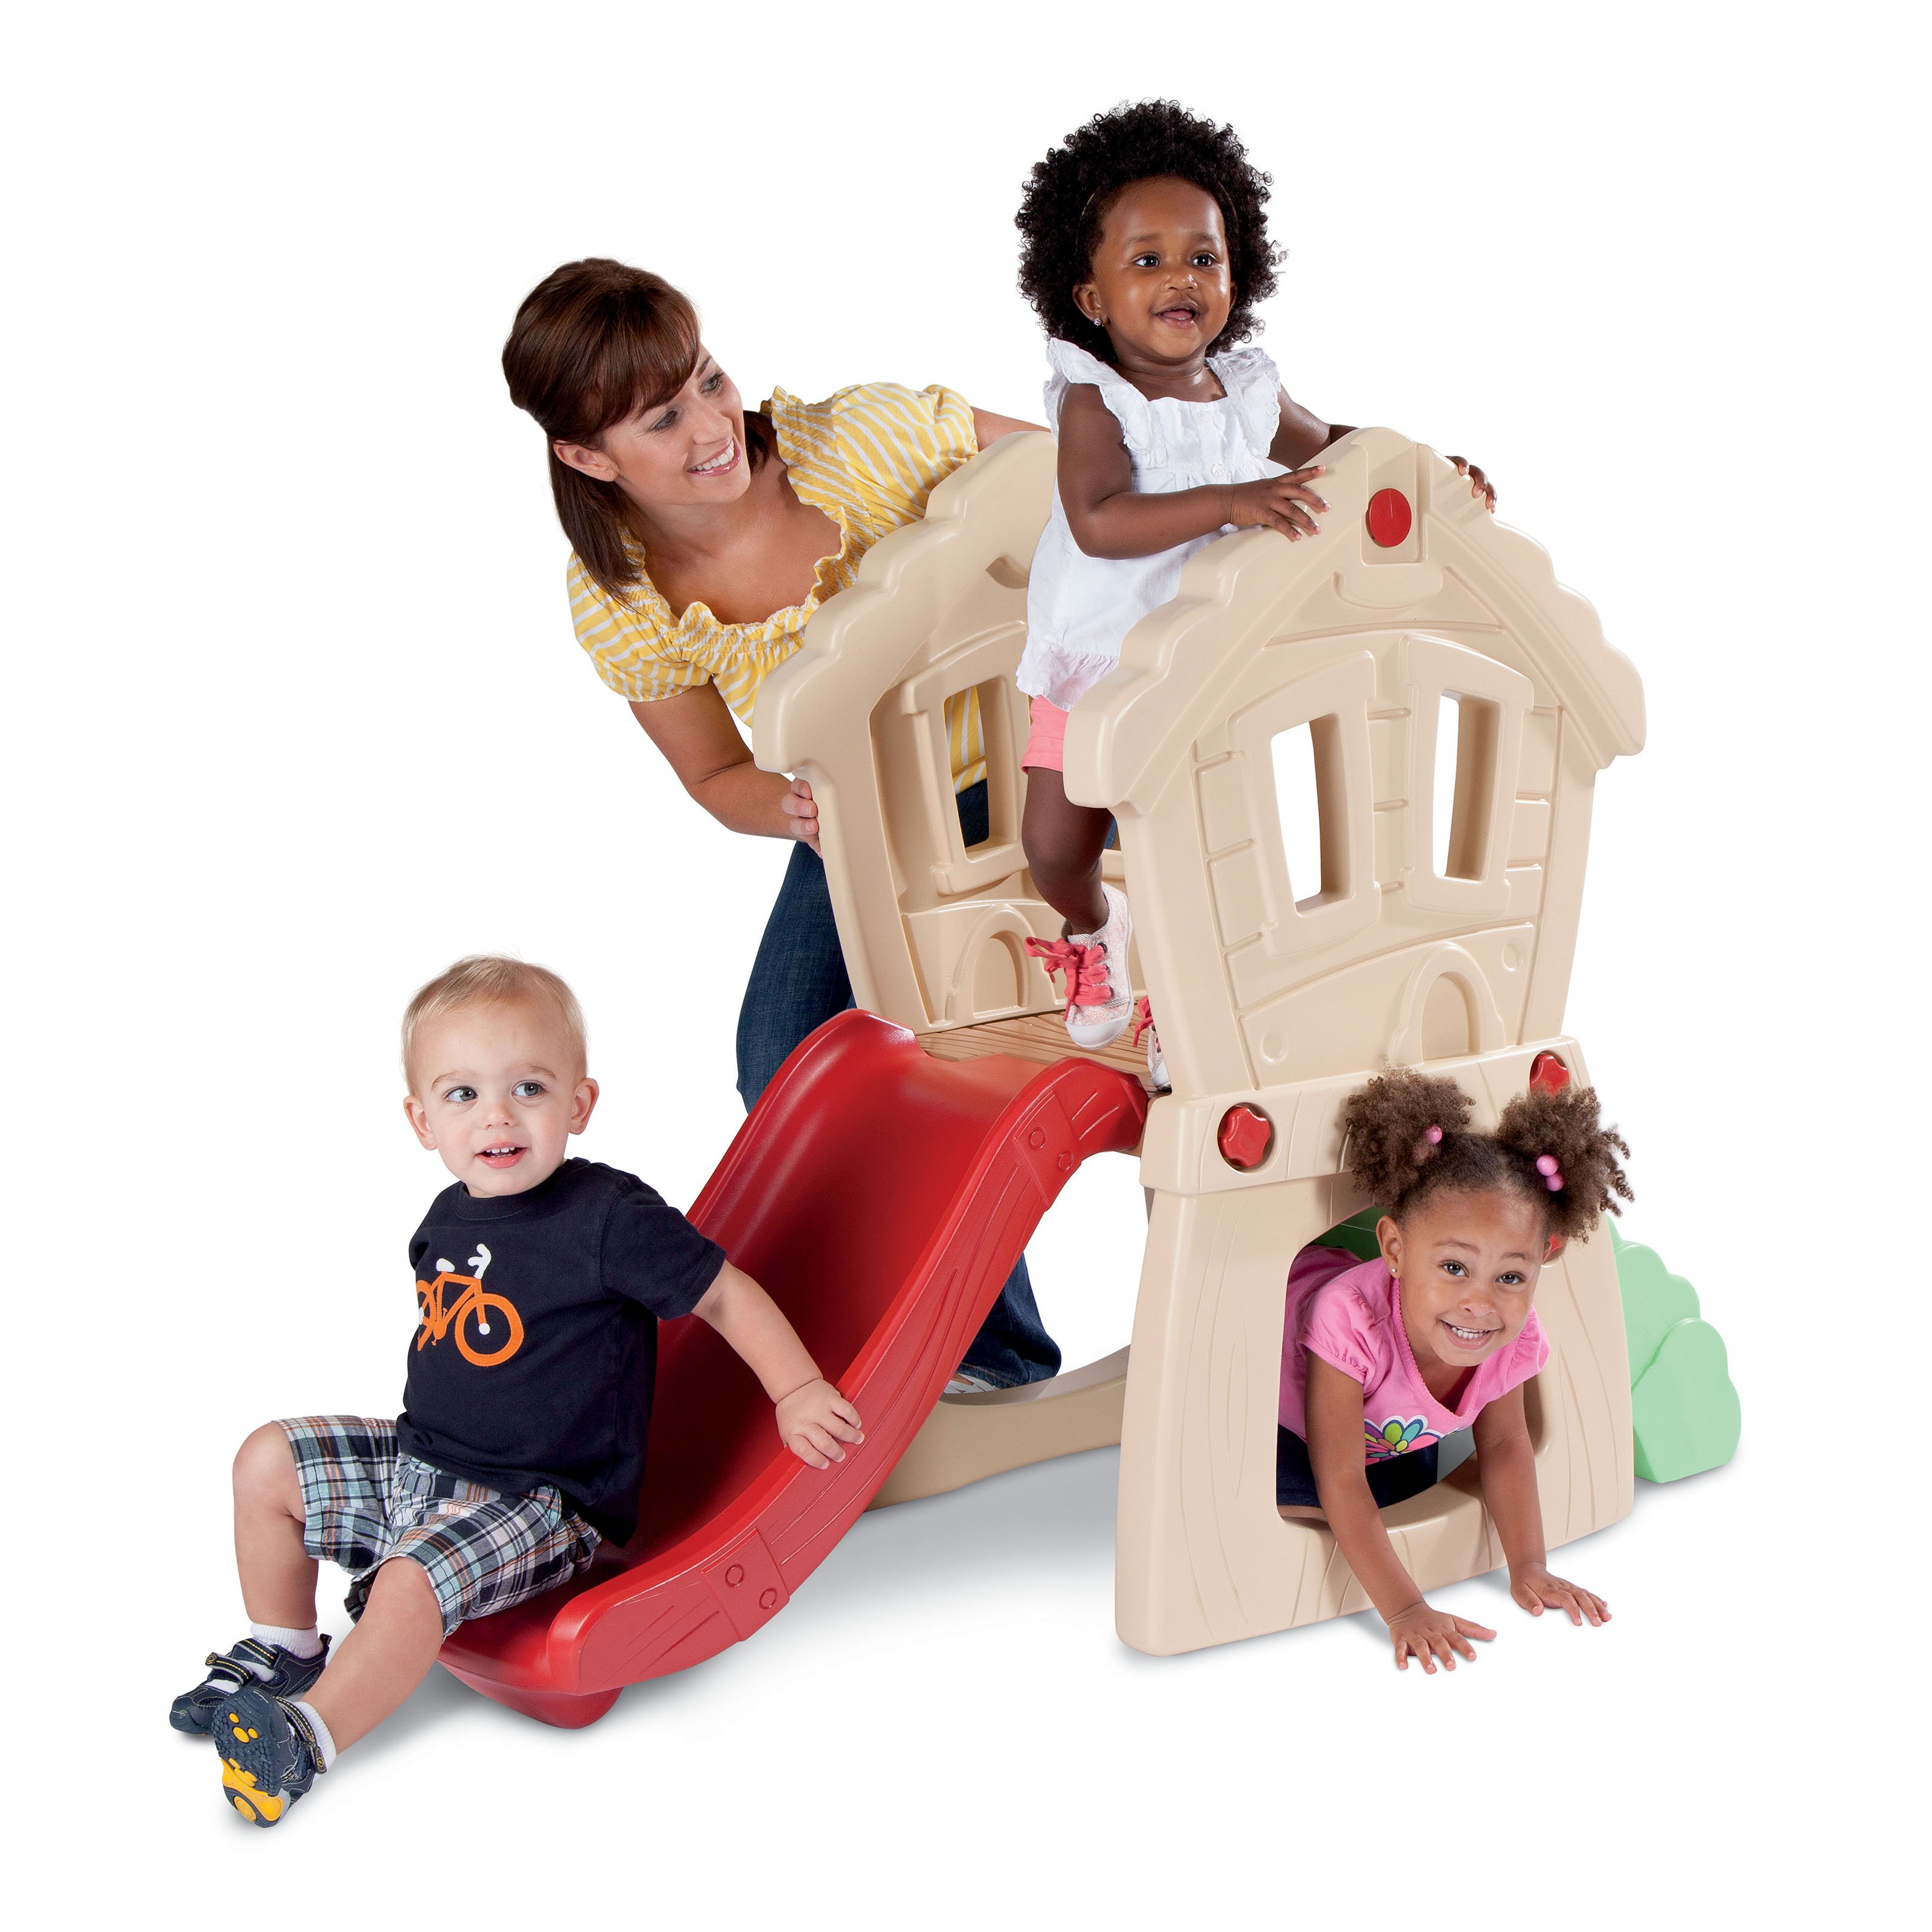 Little Tikes Hide & Seek Climber, Indoor Outdoor Slide and Climbing Playset for Kids Ages 2-5 - image 1 of 6